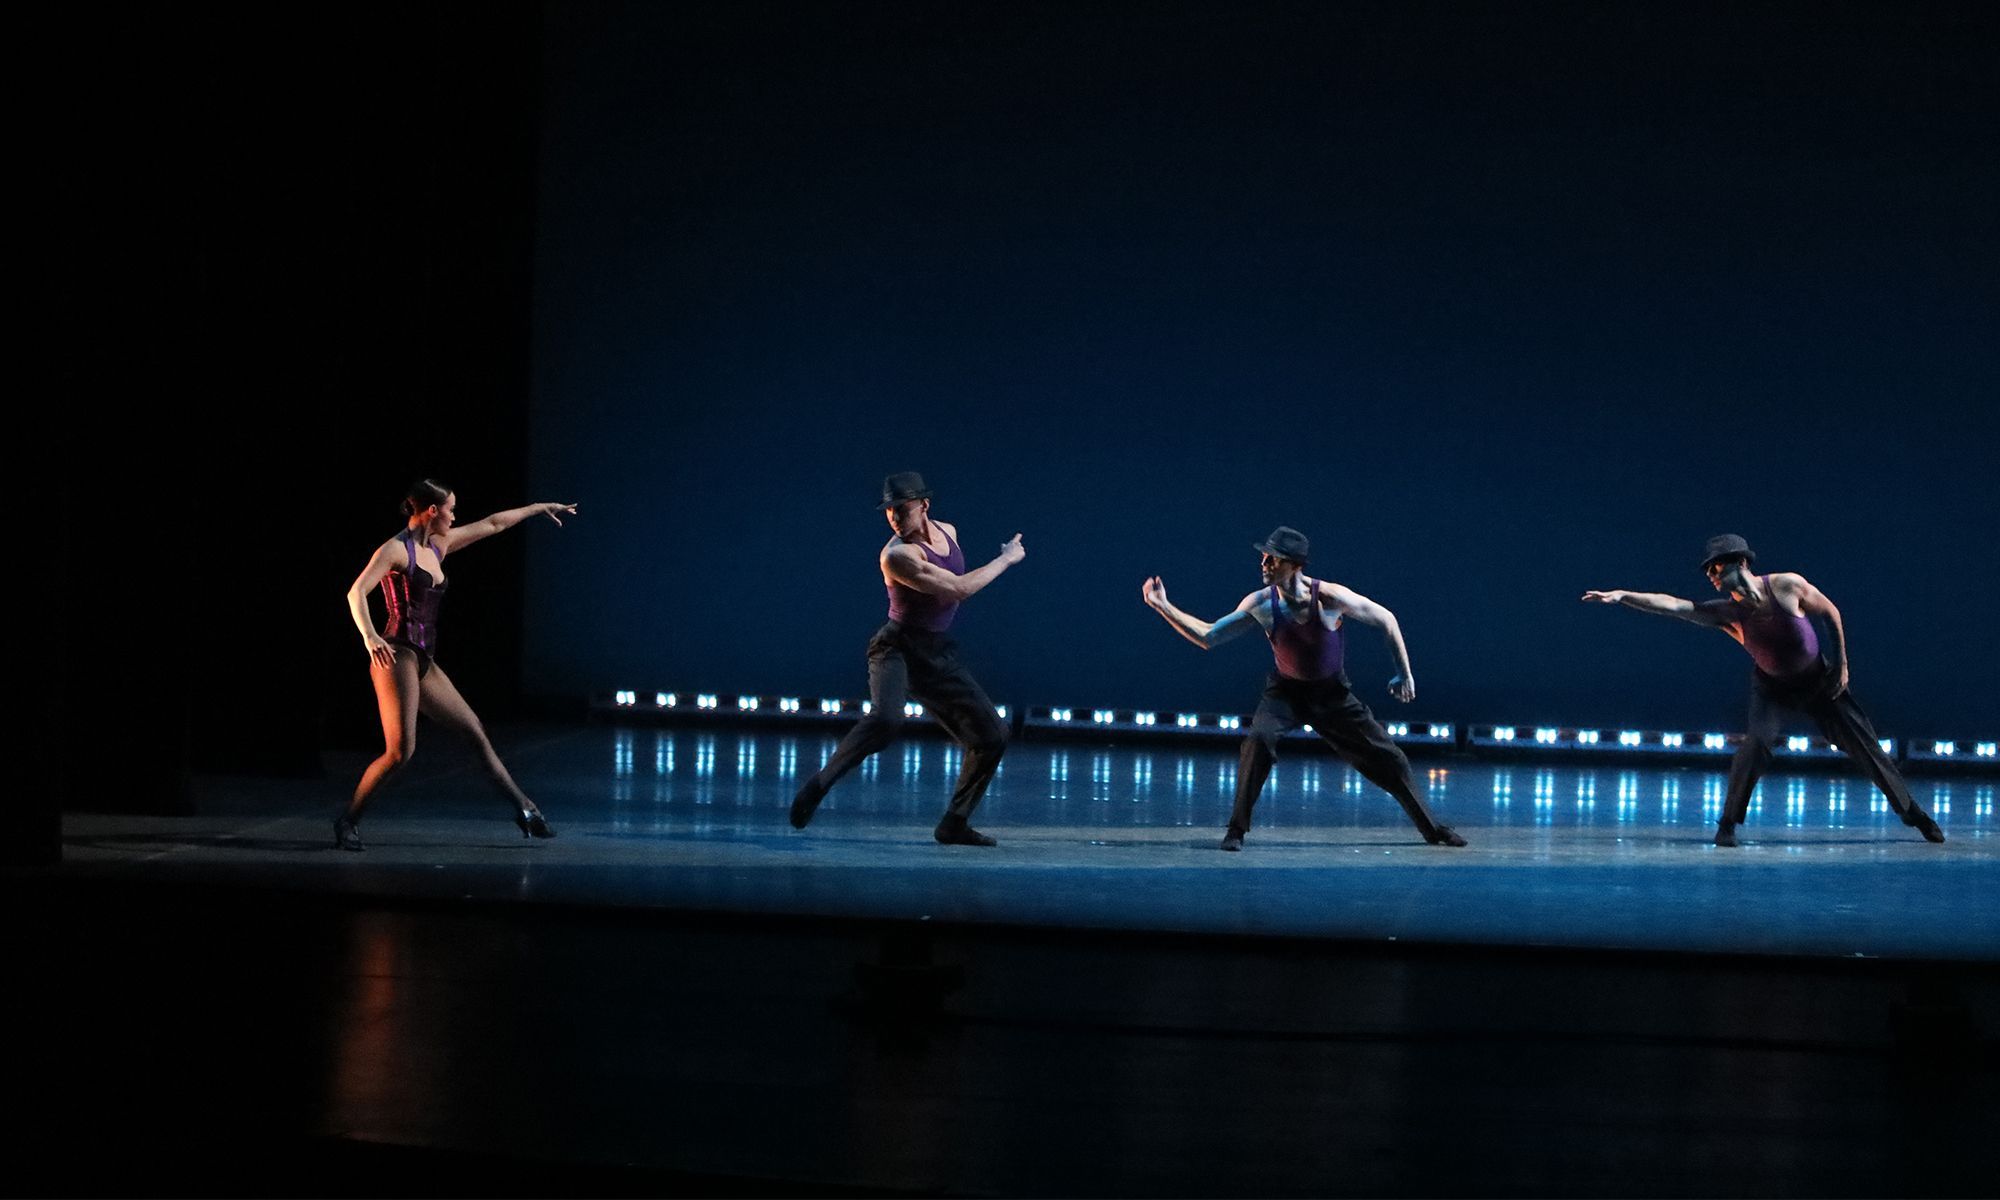 Female dancer in a corset and fishnet tights reaches toward a diagonal of male dancers dressed in pants, tank tops and fedora hats. The stage picture is complete with footlights across the back of the stage. 